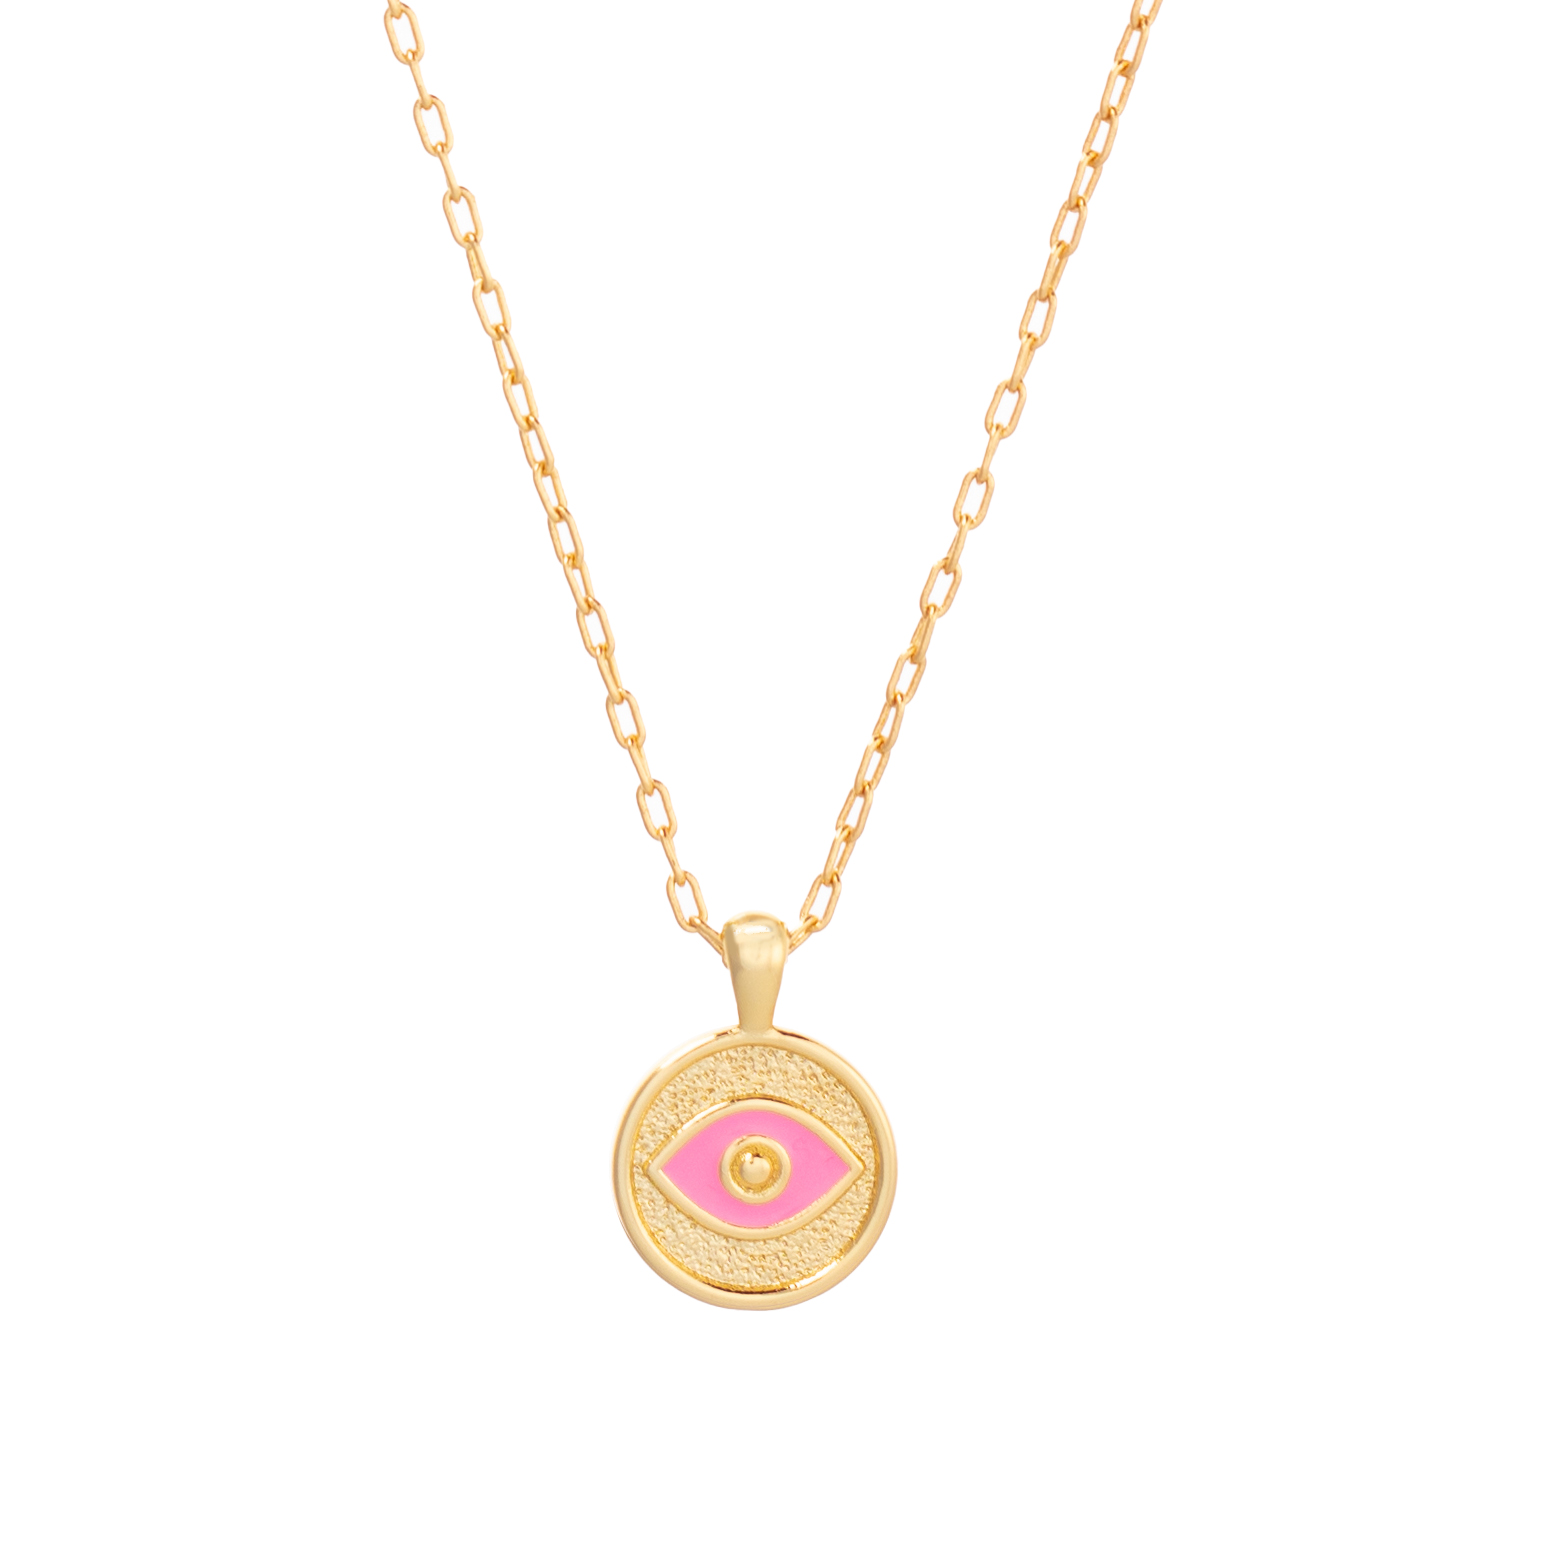 Talis Chains Talis Chains Evil Eye Pendant Necklace Pink